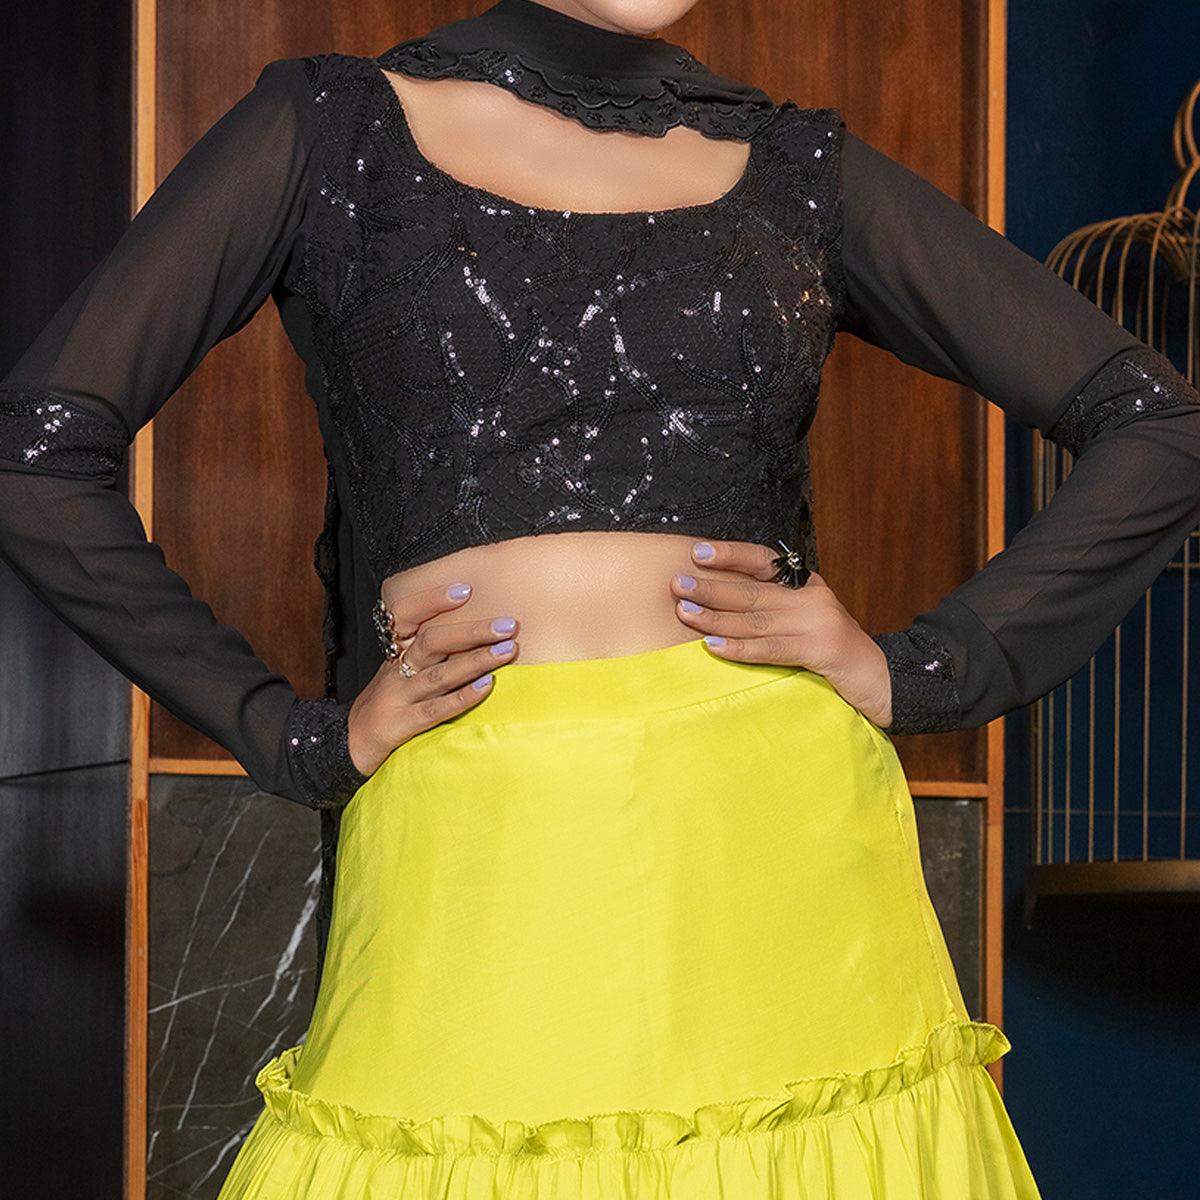 Desirable Florence Green - Black Colored Partywear Embroidered Muslin Cotton Lehenga Choli - Peachmode